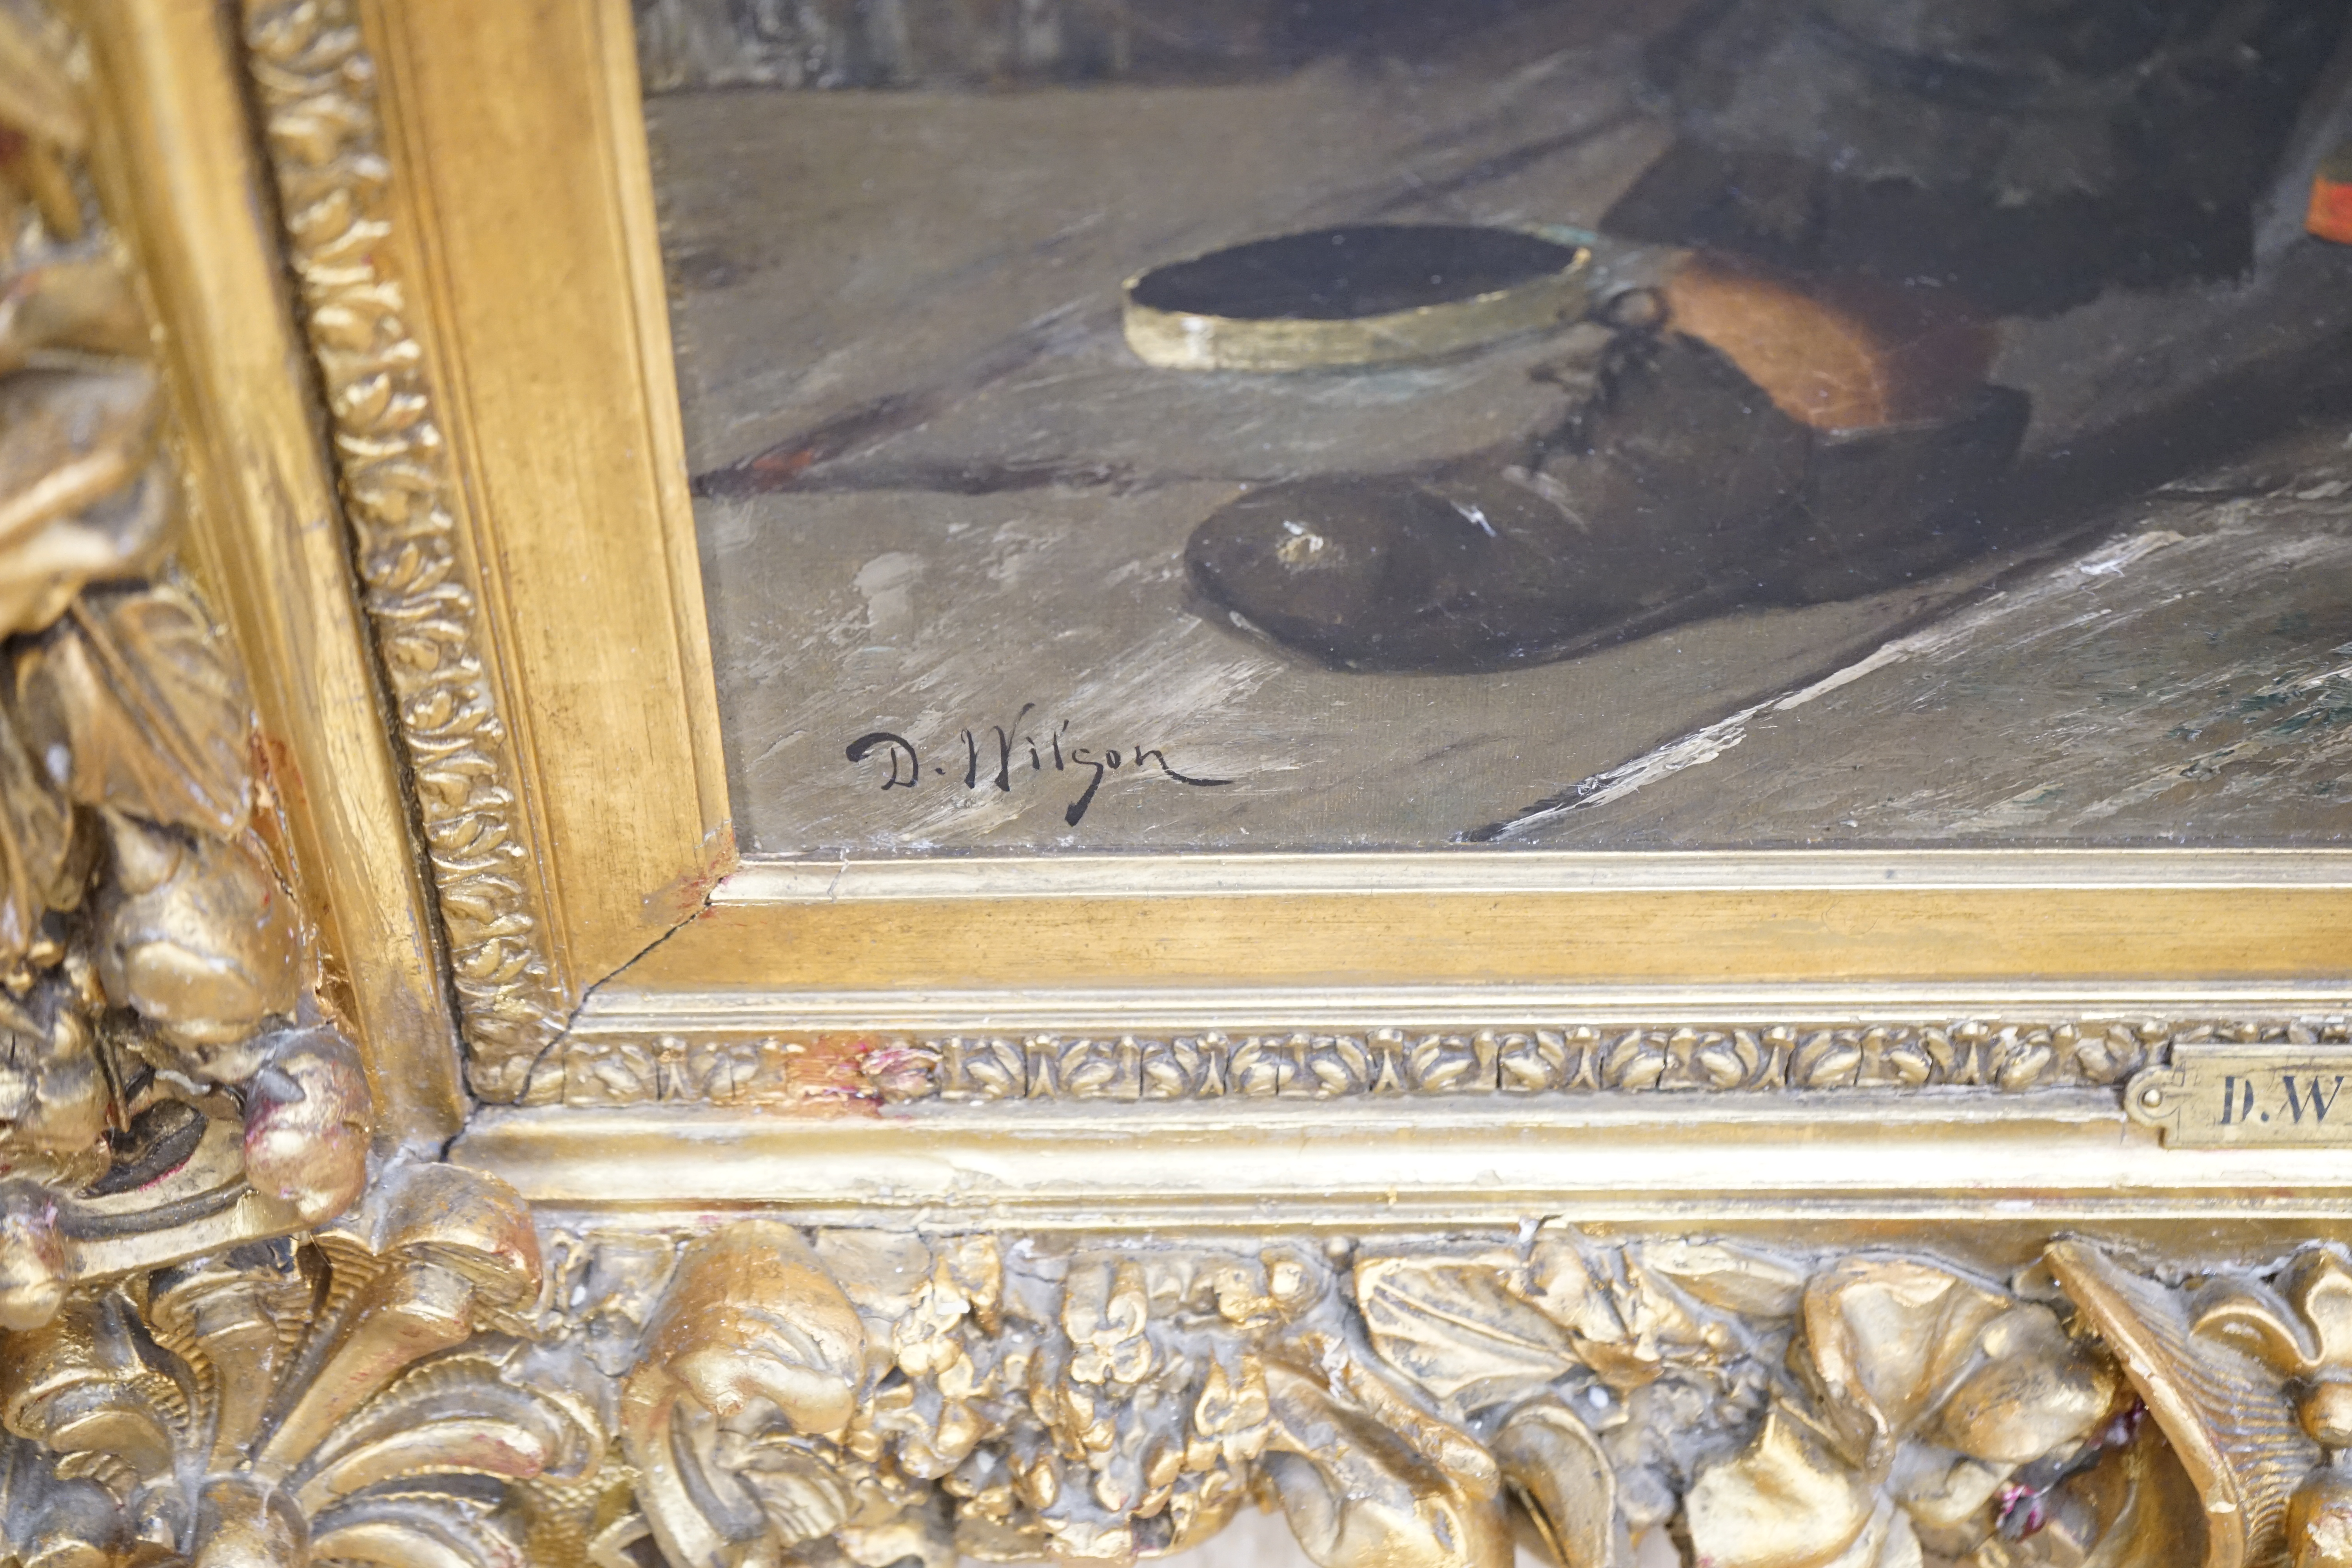 D. Wilson (19th C.), oil on canvas, Full length study of a boy smoking, signed, applied plaque to the frame, 79 x 48cm, ornate gilt framed. Condition - fair, losses to the frame